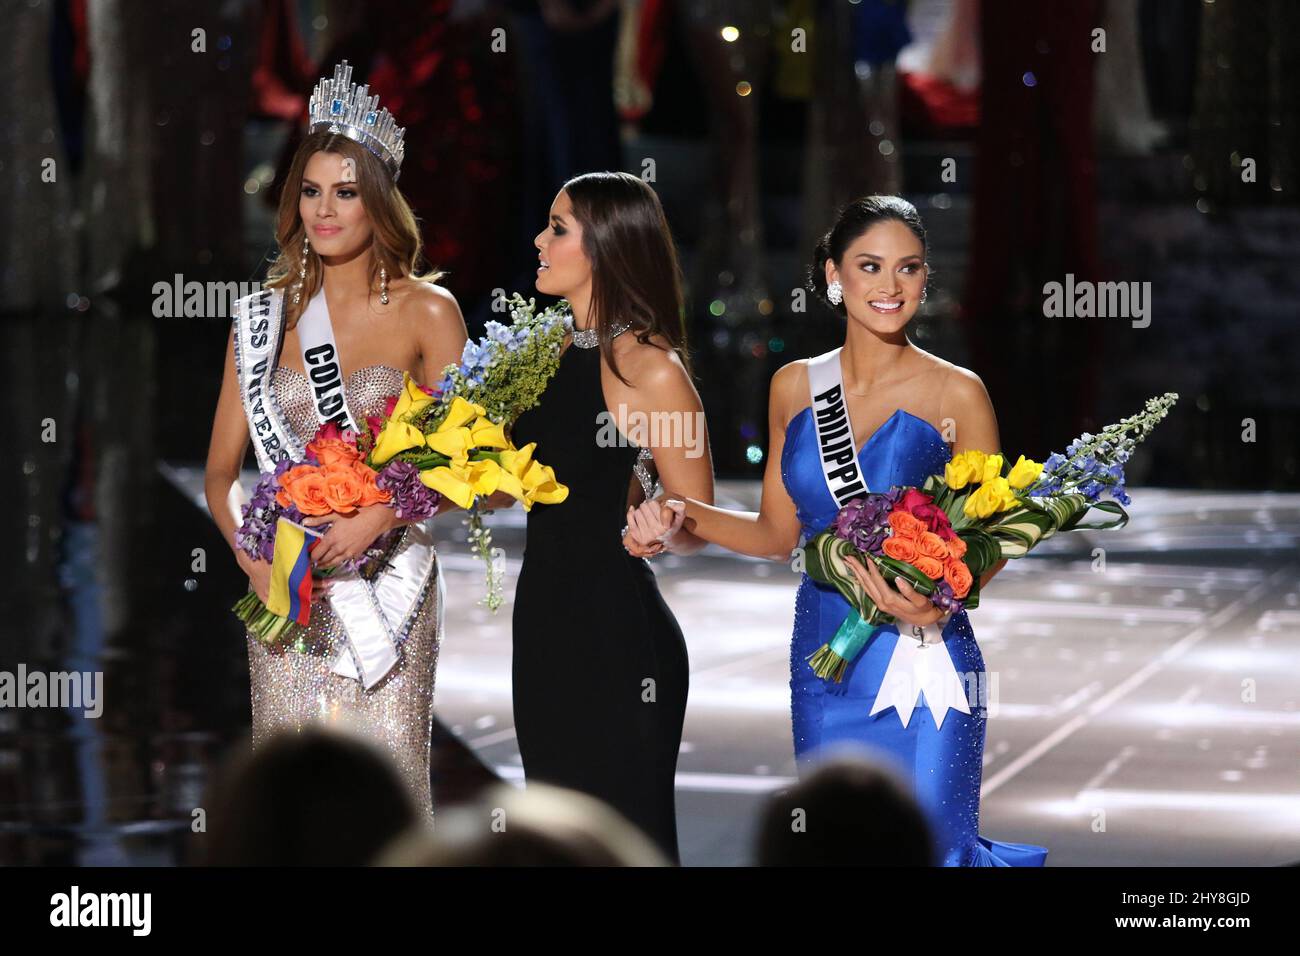 Miss Colombia, Ariadna Gutierrez-Arevalo, Paulina Vega, Miss Universe 2014, Miss Philippines, Pia Alonzo Wurtzbach during the 2015 MISS UNIVERSE Pageant, Planet Hollywood Resort & Casino Stock Photo